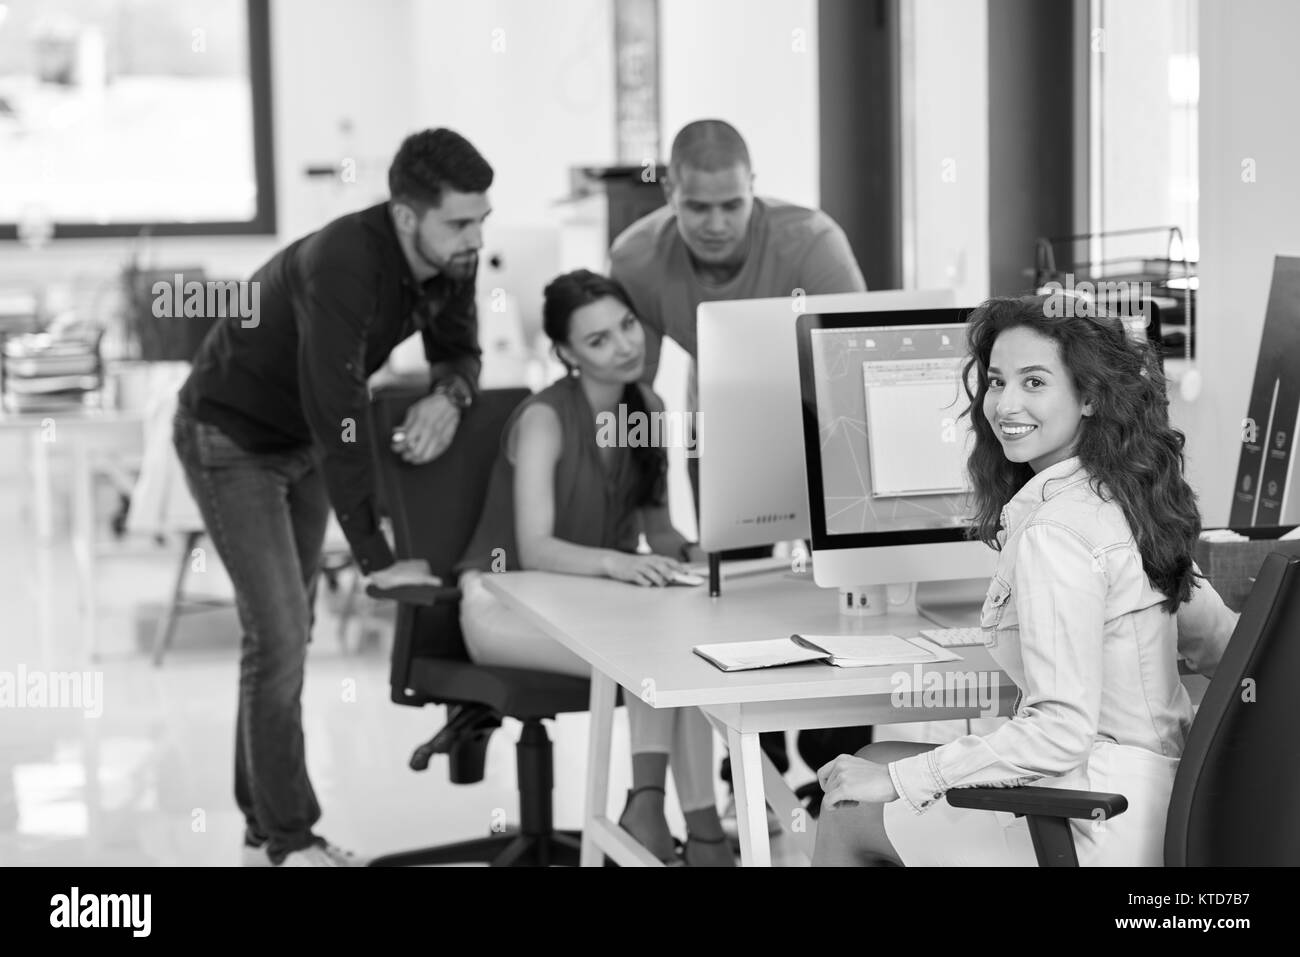 startup business people group working everyday job at modern office Stock Photo